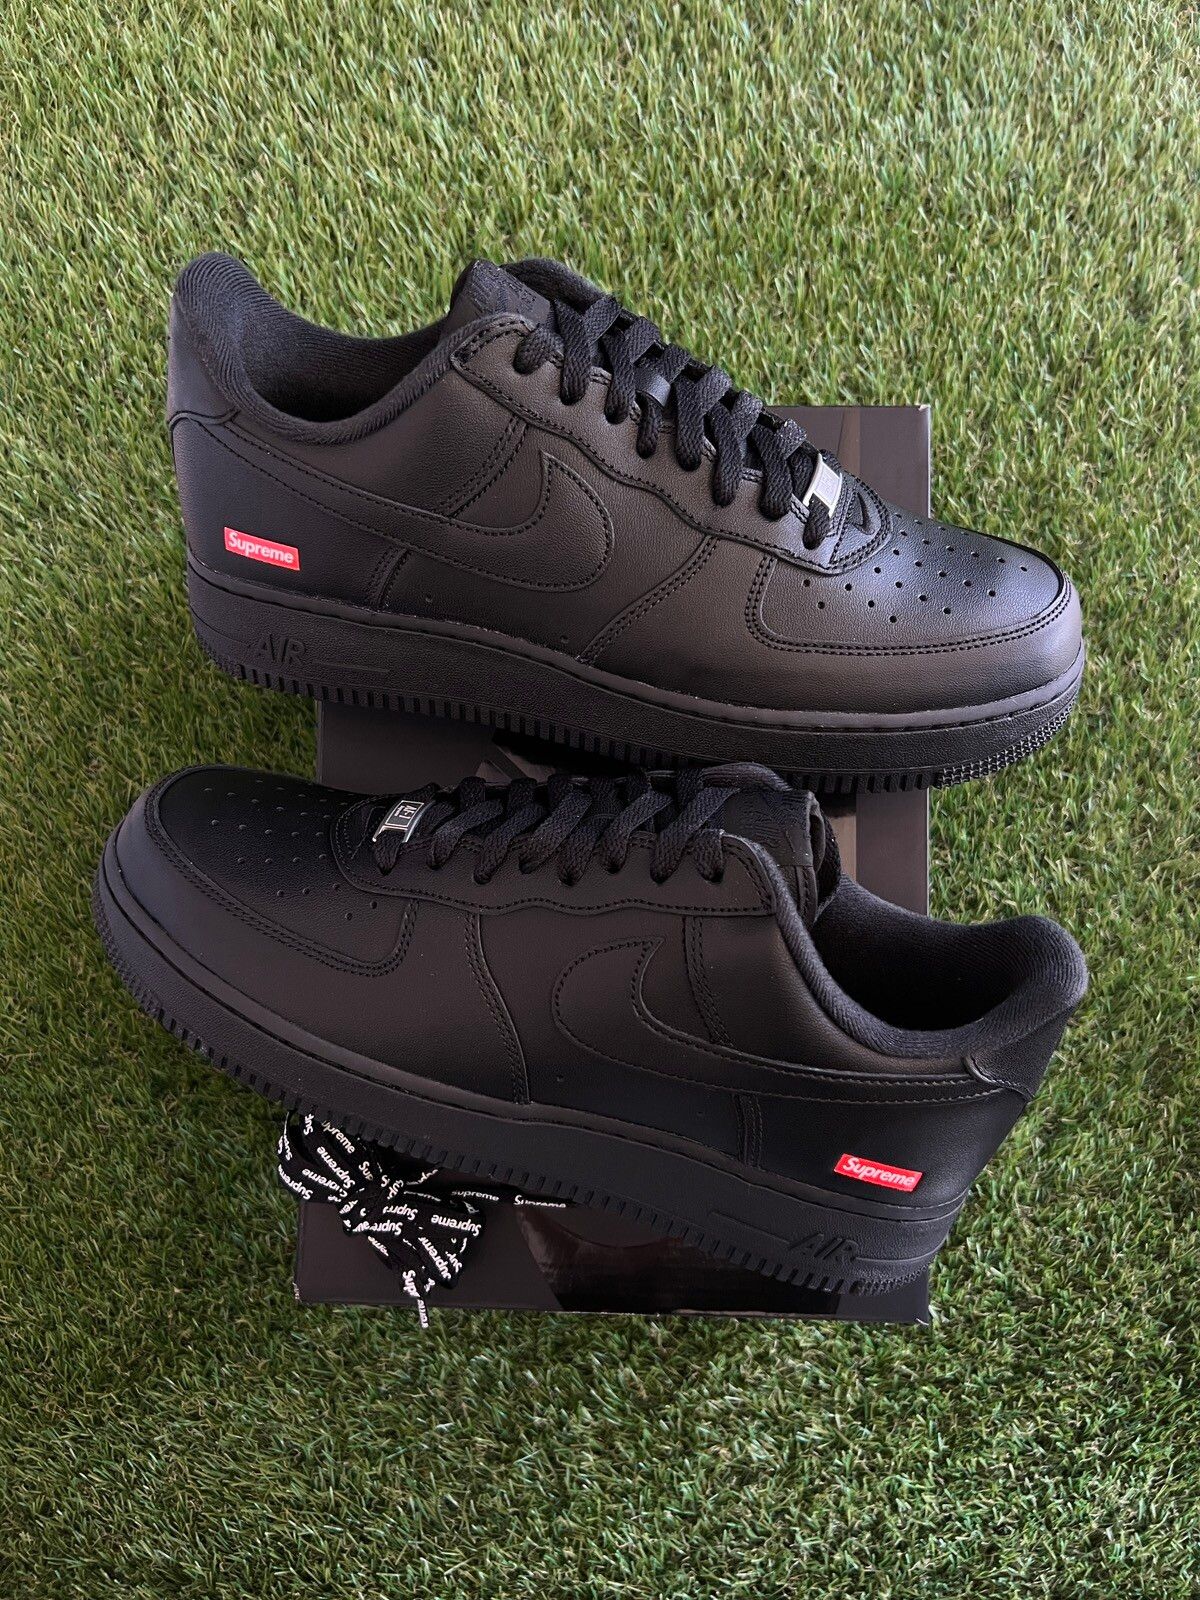 Pre-owned Nike X Supreme Nike Air Force 1 Size 8.5 Shoes In Black